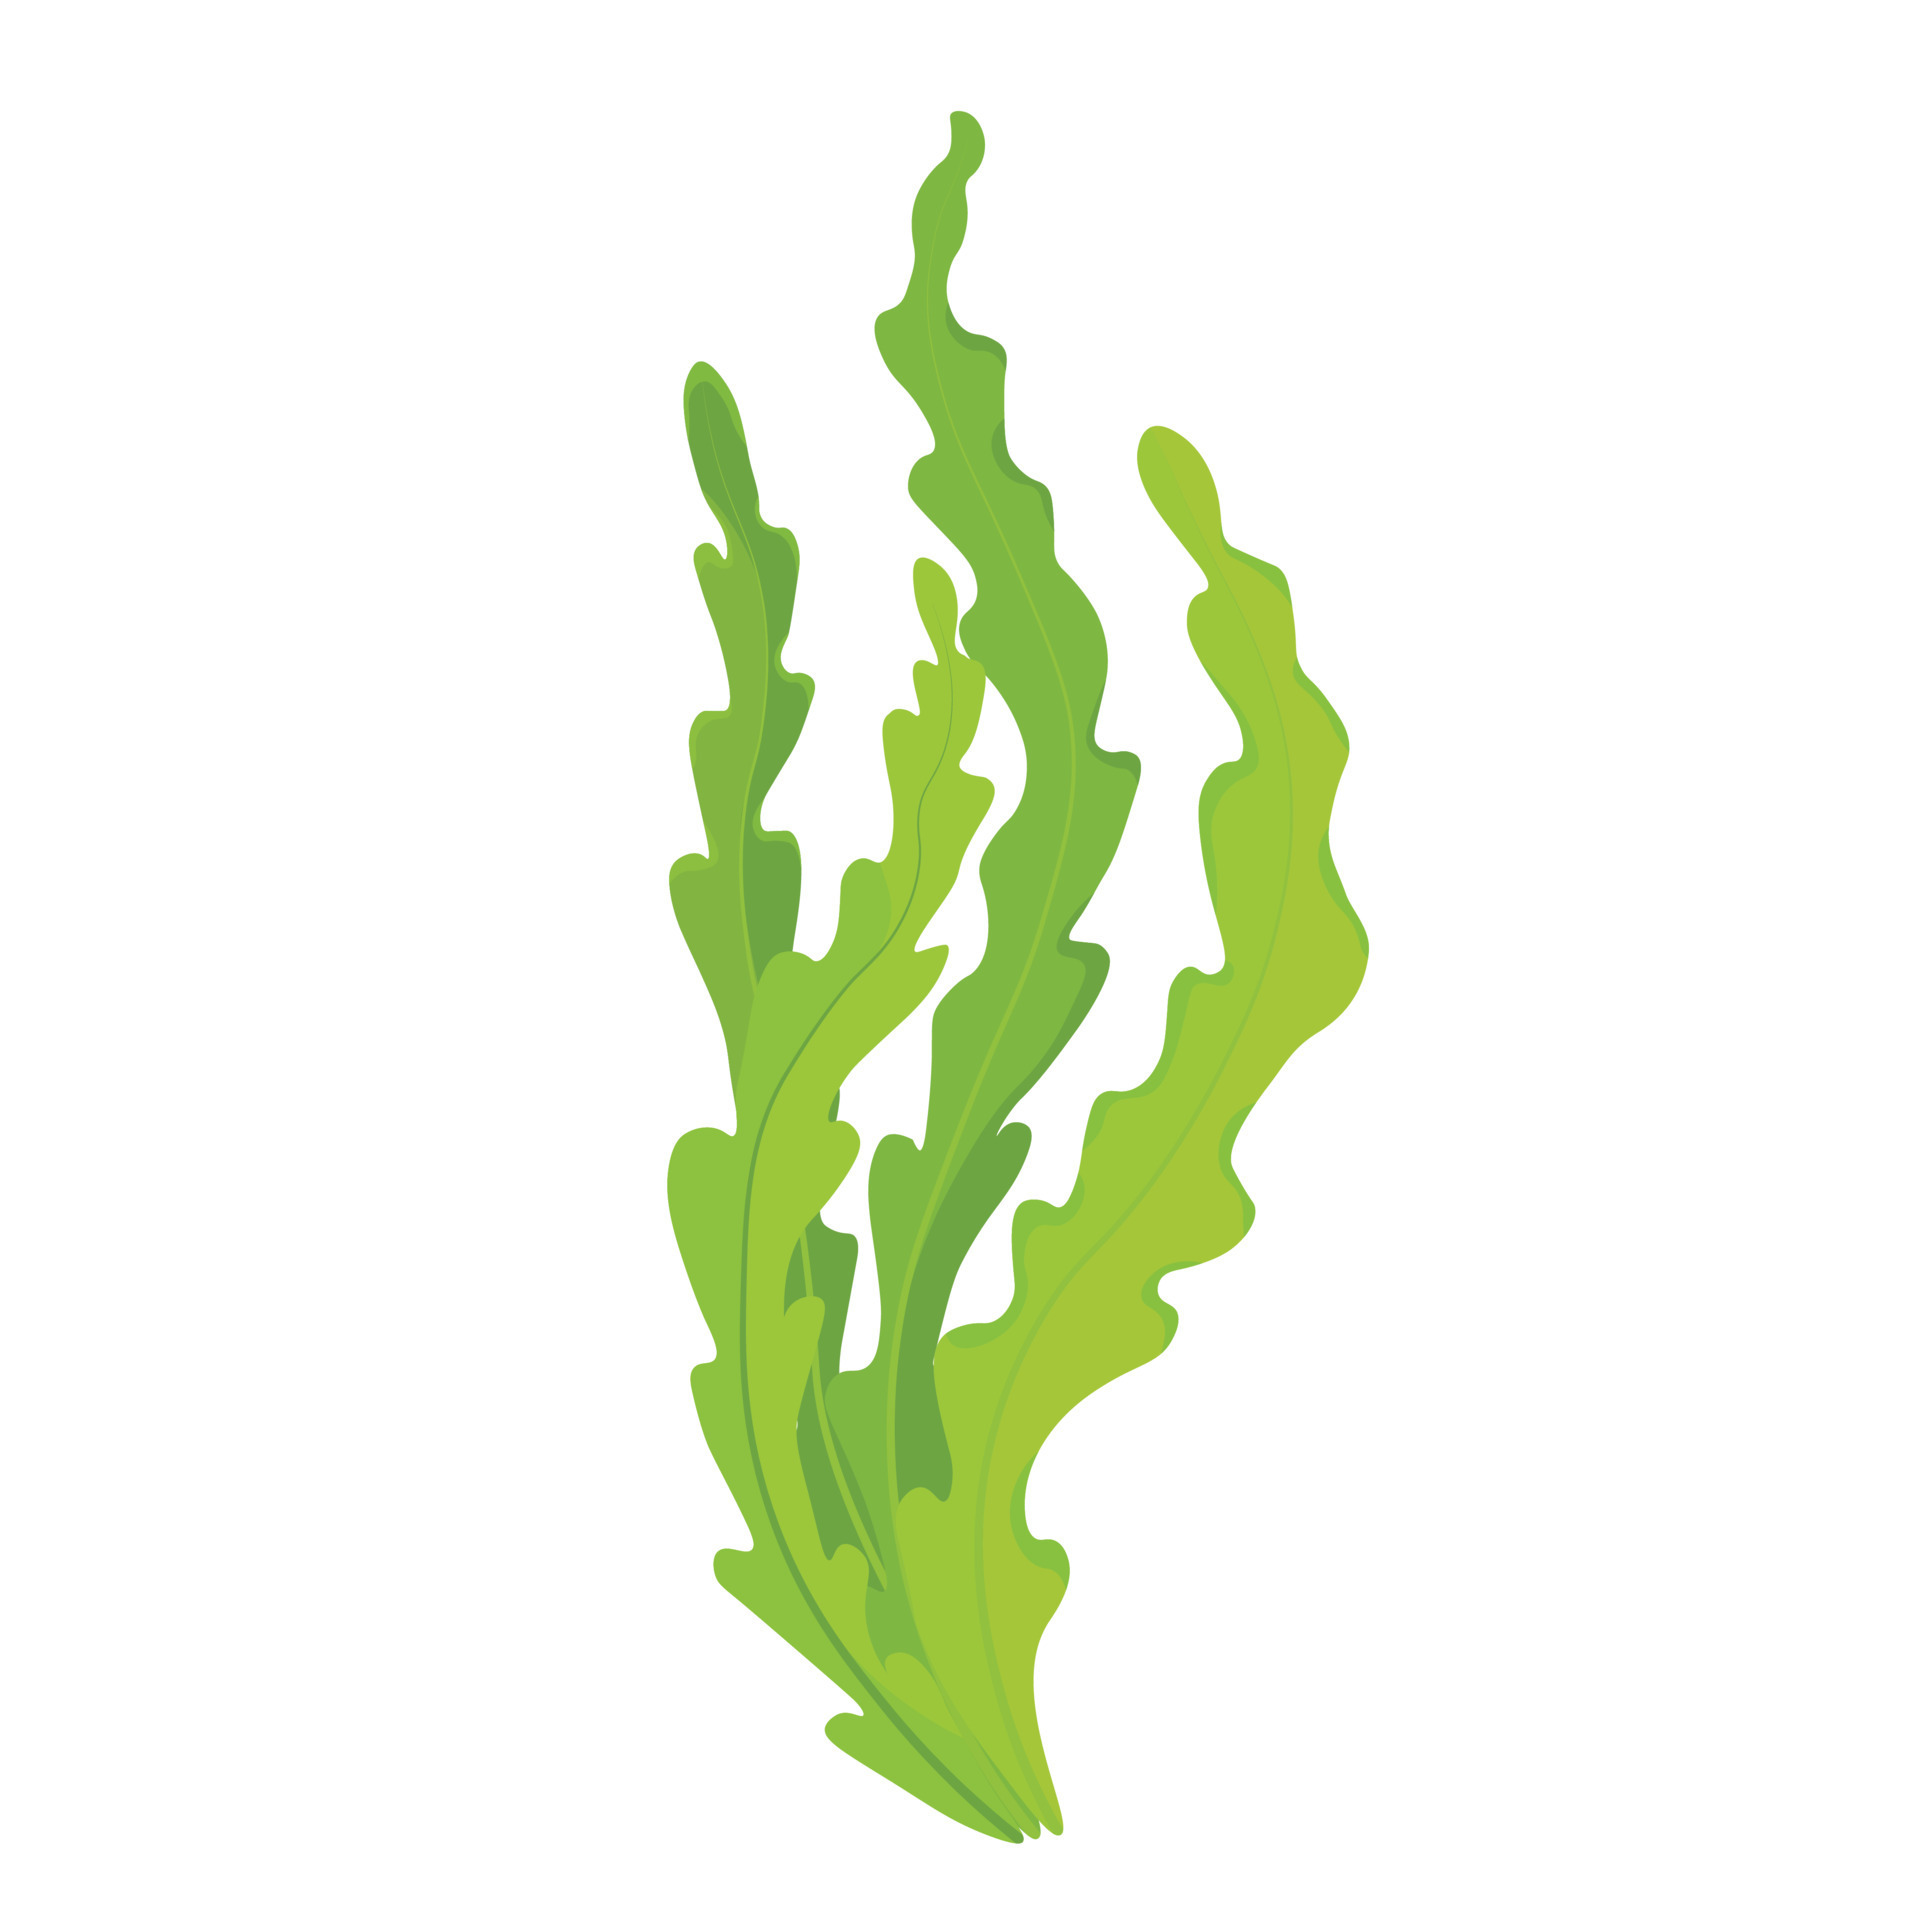 https://static.vecteezy.com/system/resources/previews/020/321/942/original/seaweed-laminaria-illustration-cartoon-seaweeds-kelp-and-corals-aquatic-plants-with-leaves-natural-marine-and-aquarium-elements-water-decor-objects-vector.jpg